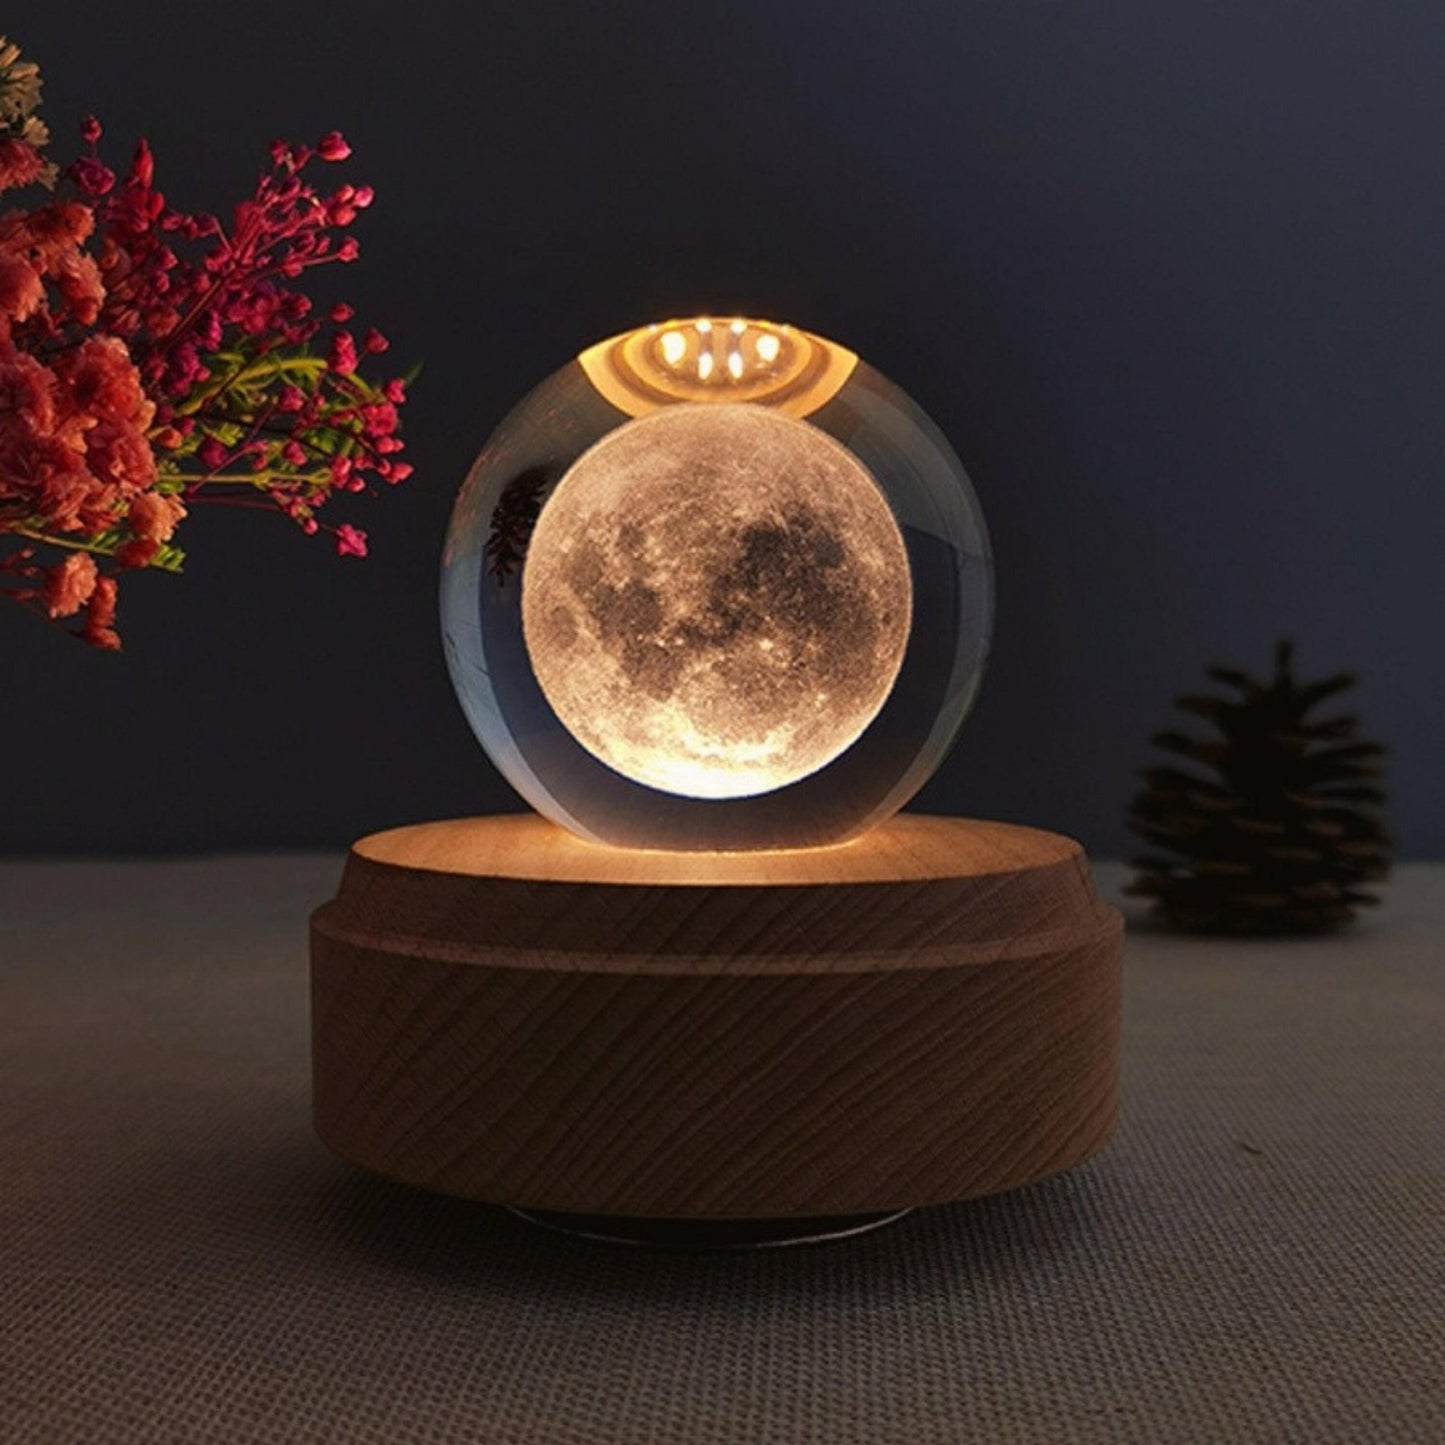 Space Crystal Lamp and Music Box - Space Mesmerise - Space Gifts | Lamps | Statues | Home Decor